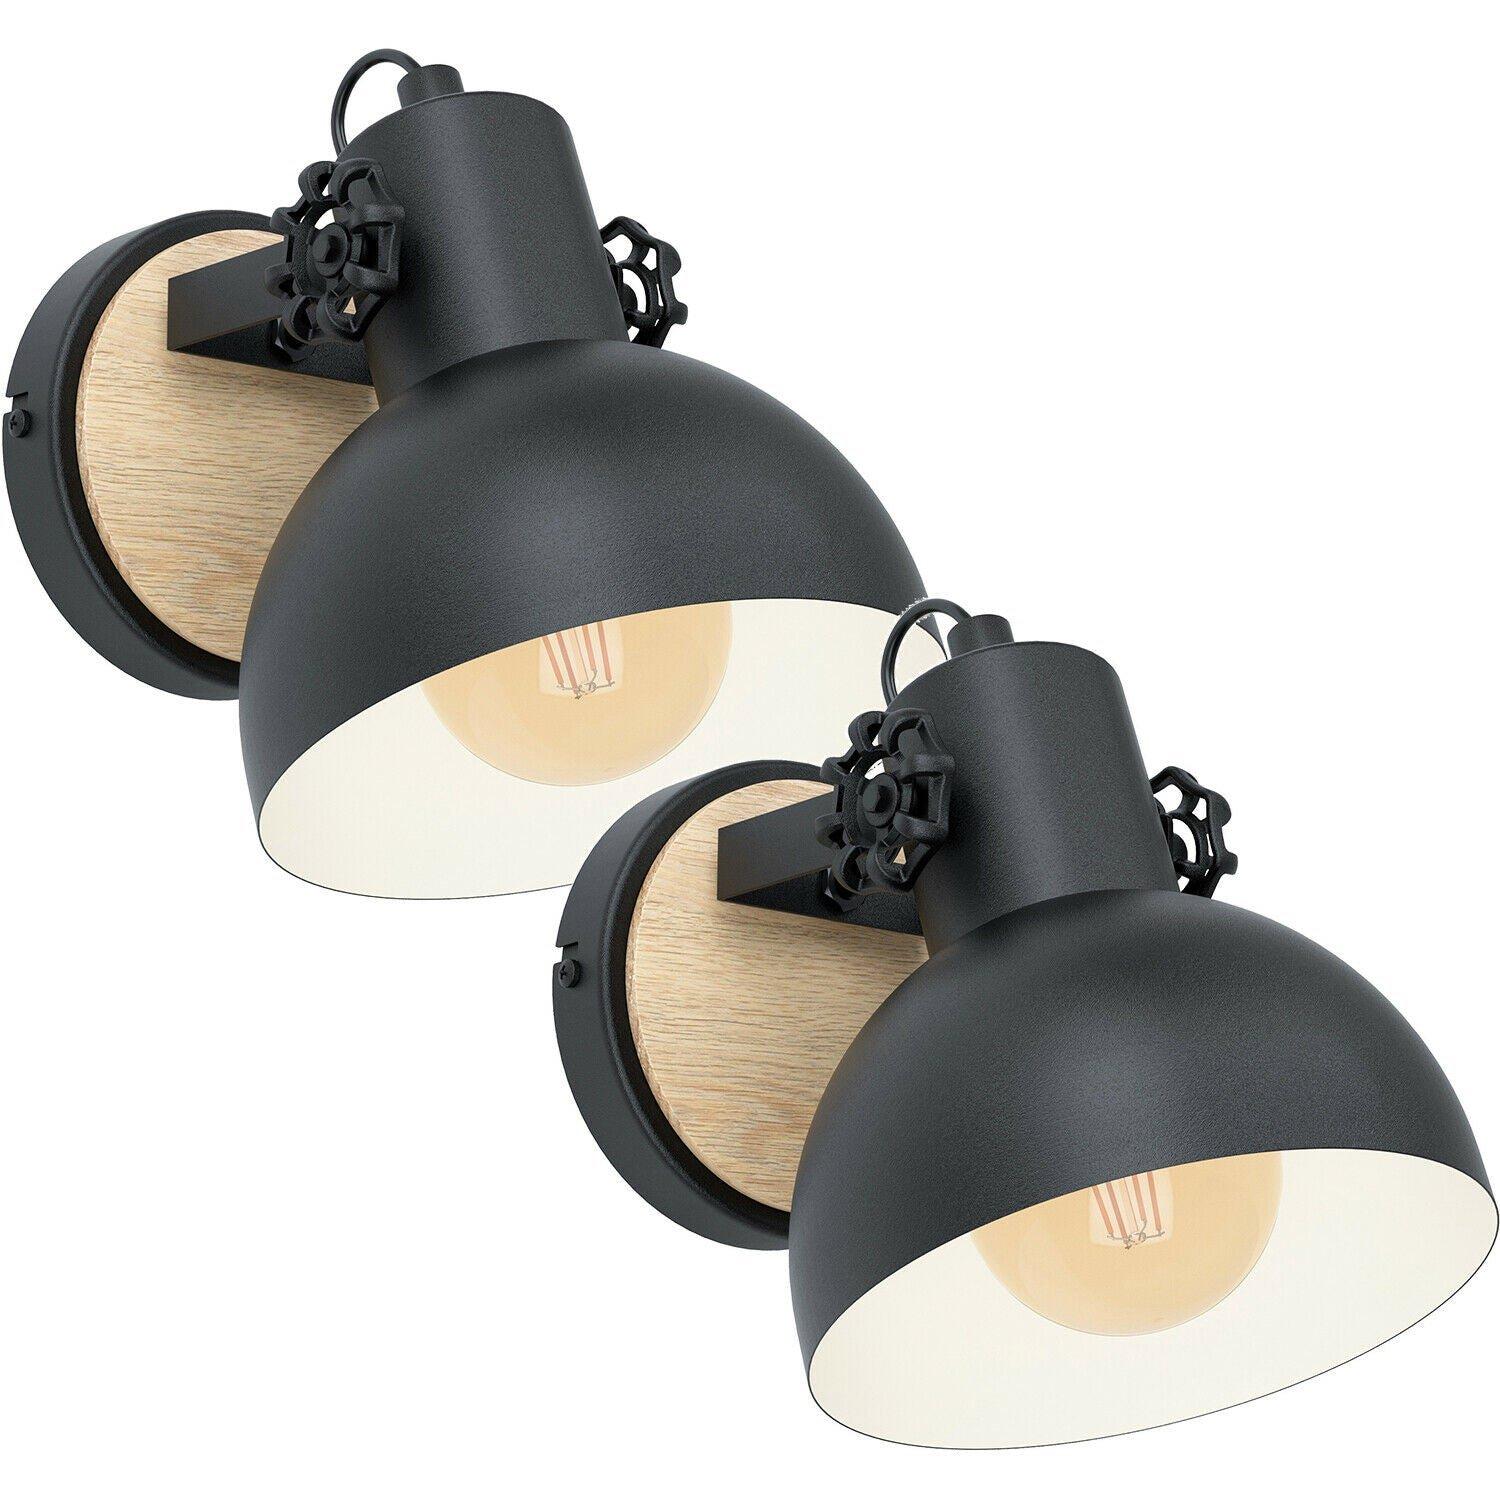 2 PACK LED Wall Light / Sconce Black & Wood Round Adjustable Shade 10W E27